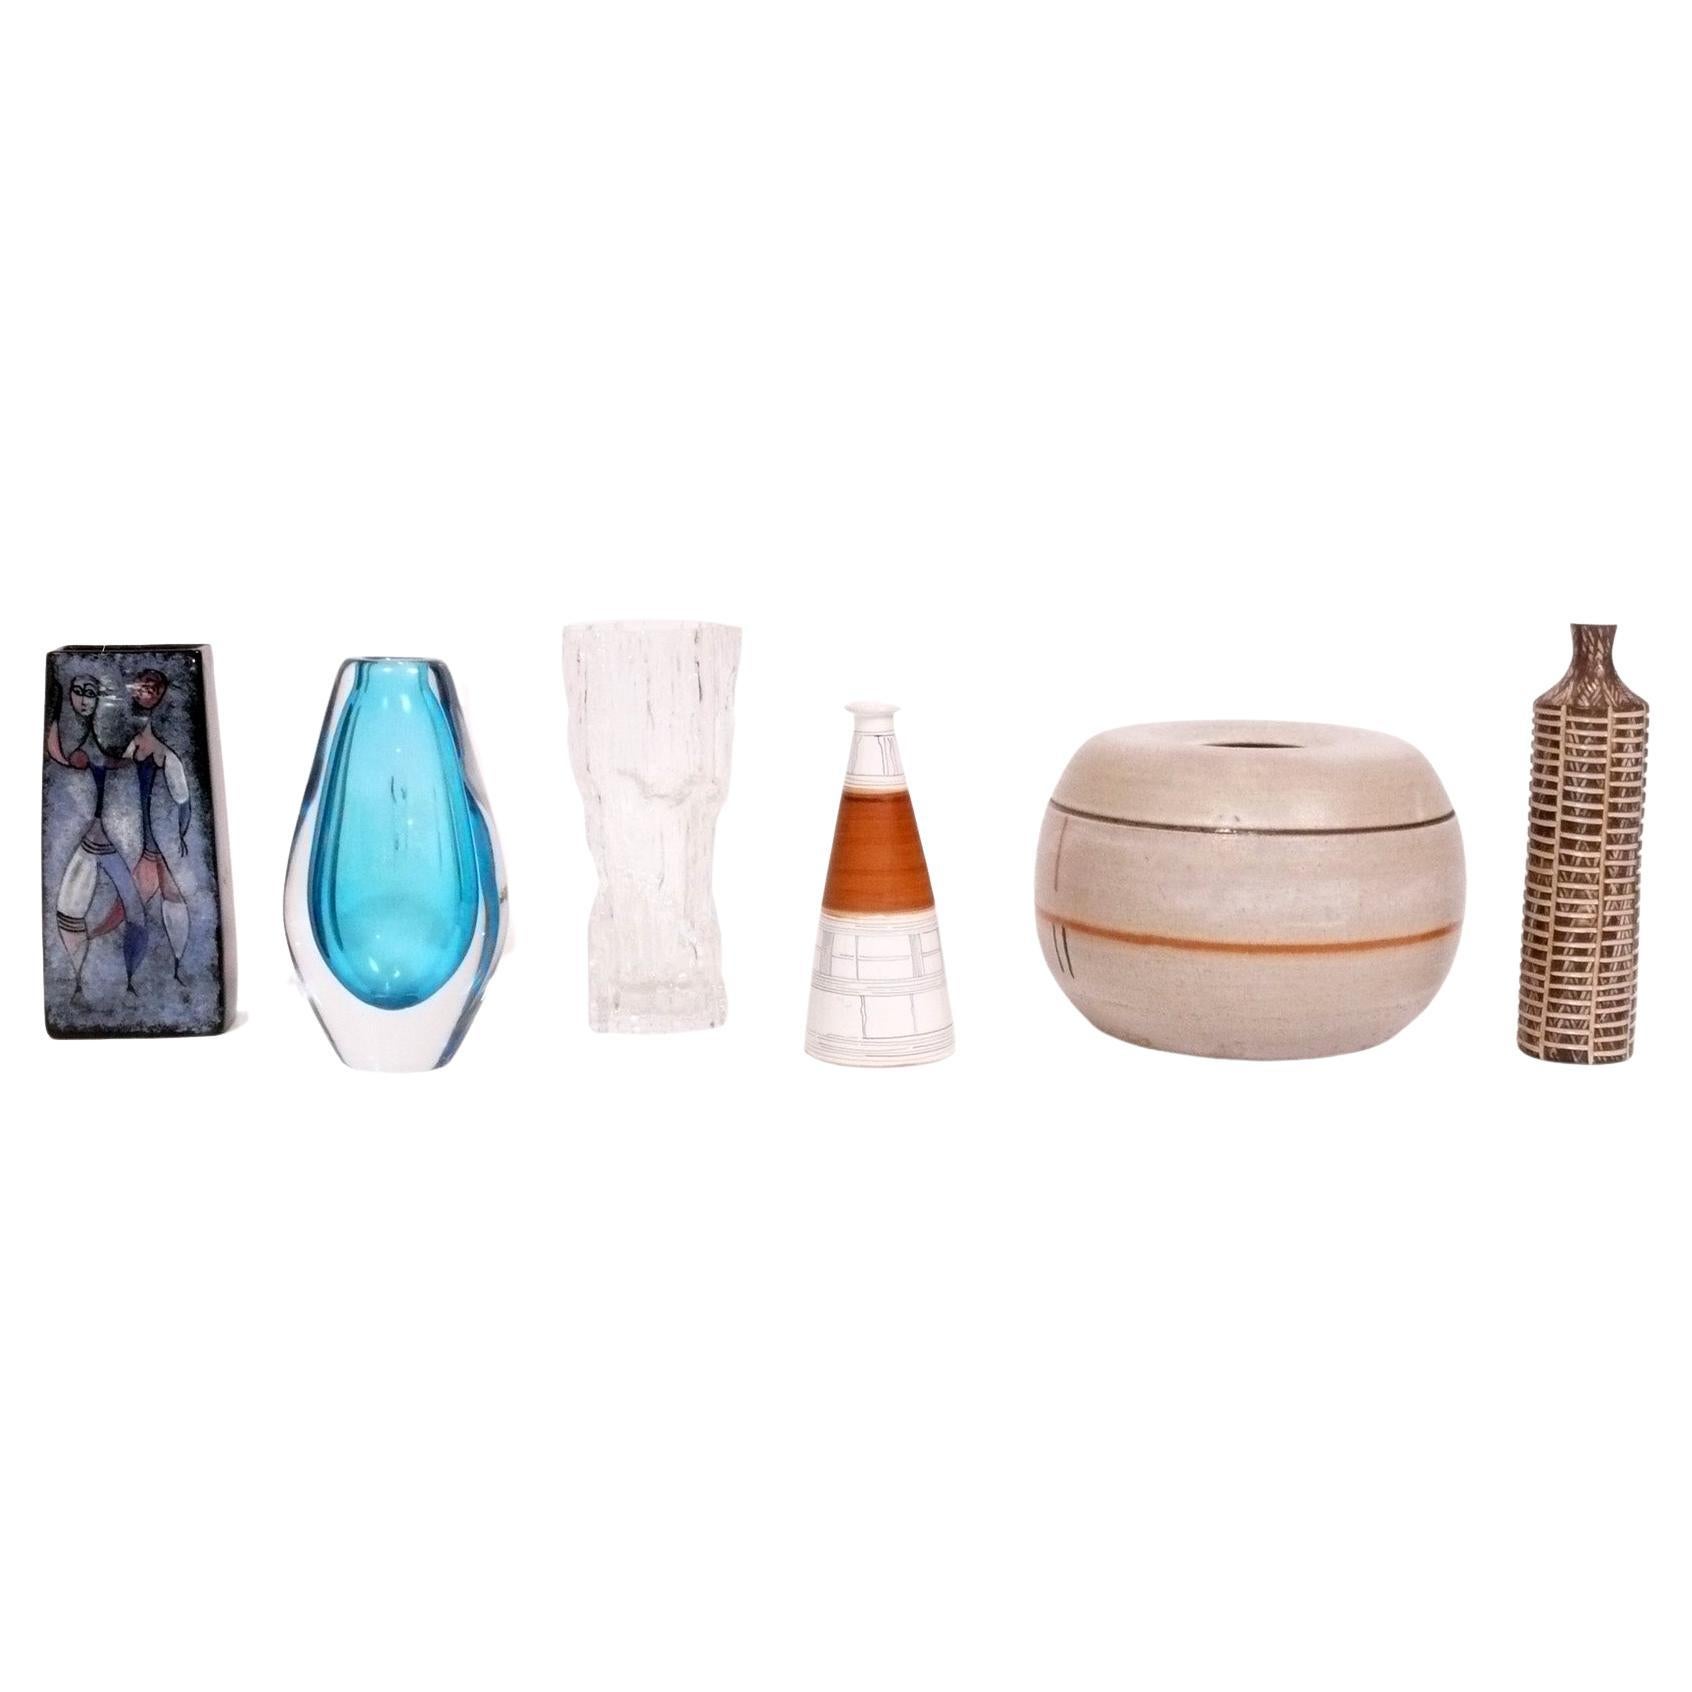 Selection of Mid Century Modern Glass and Pottery Vases